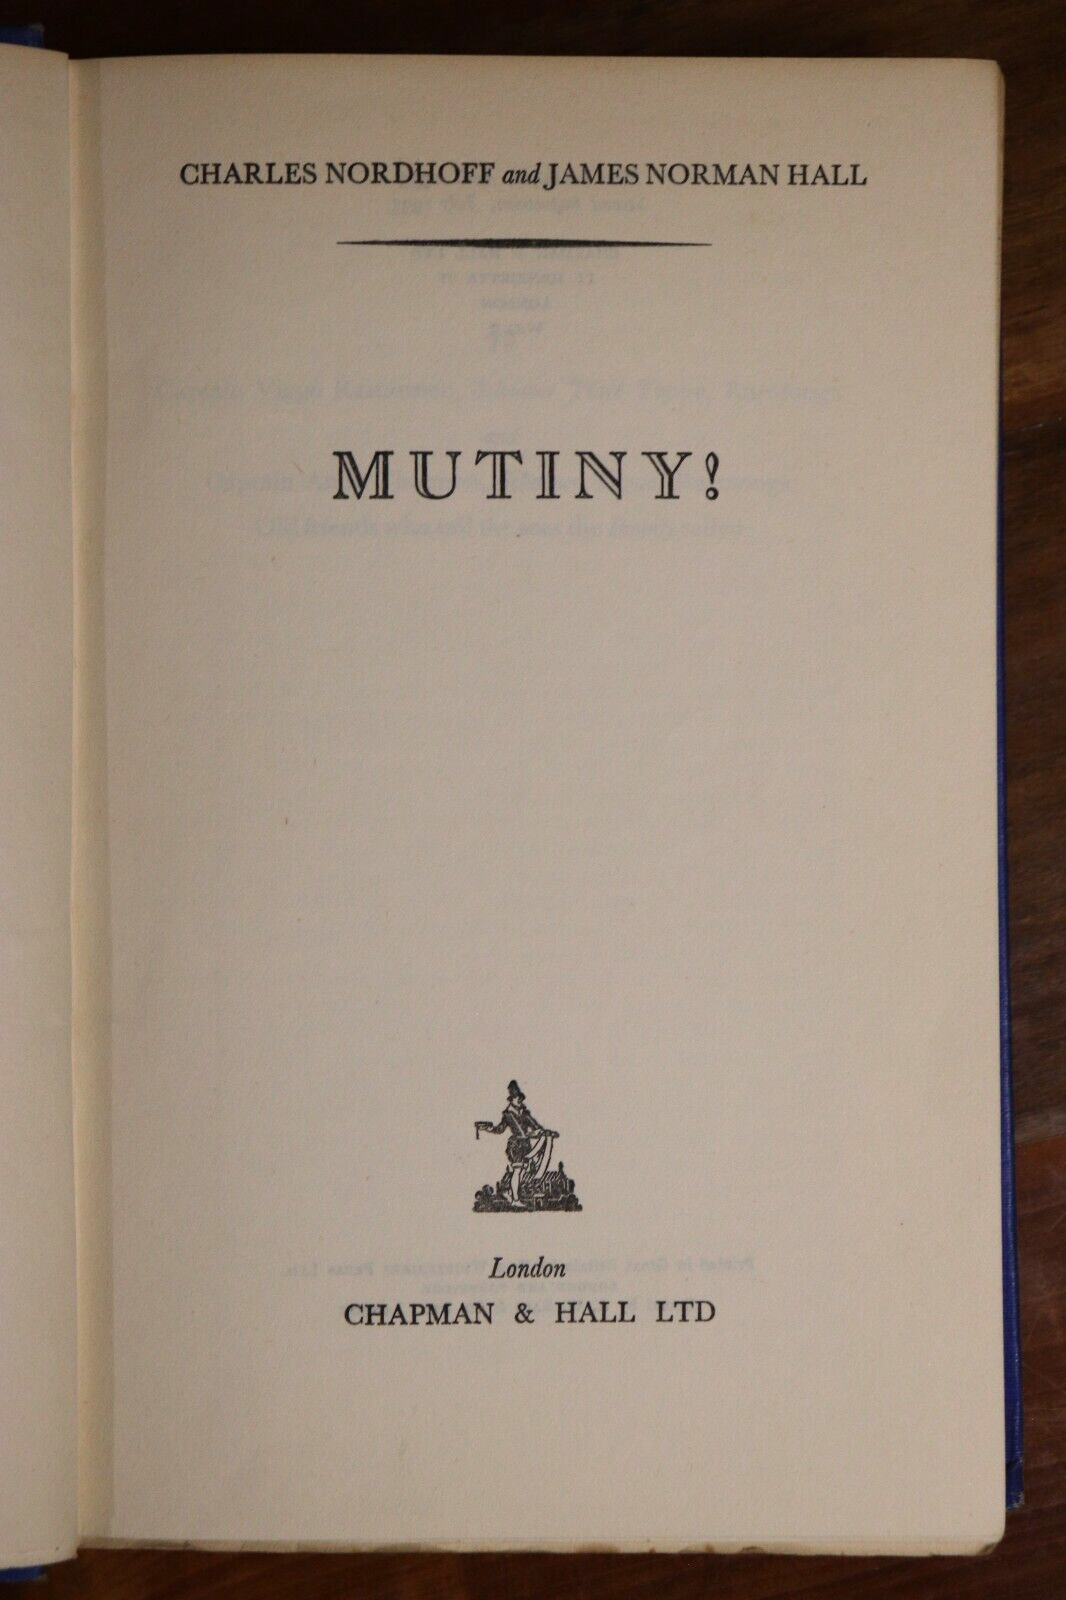 Mutiny! by Charles Nordhoff - 1933 - Antique Travel & Exploration Book